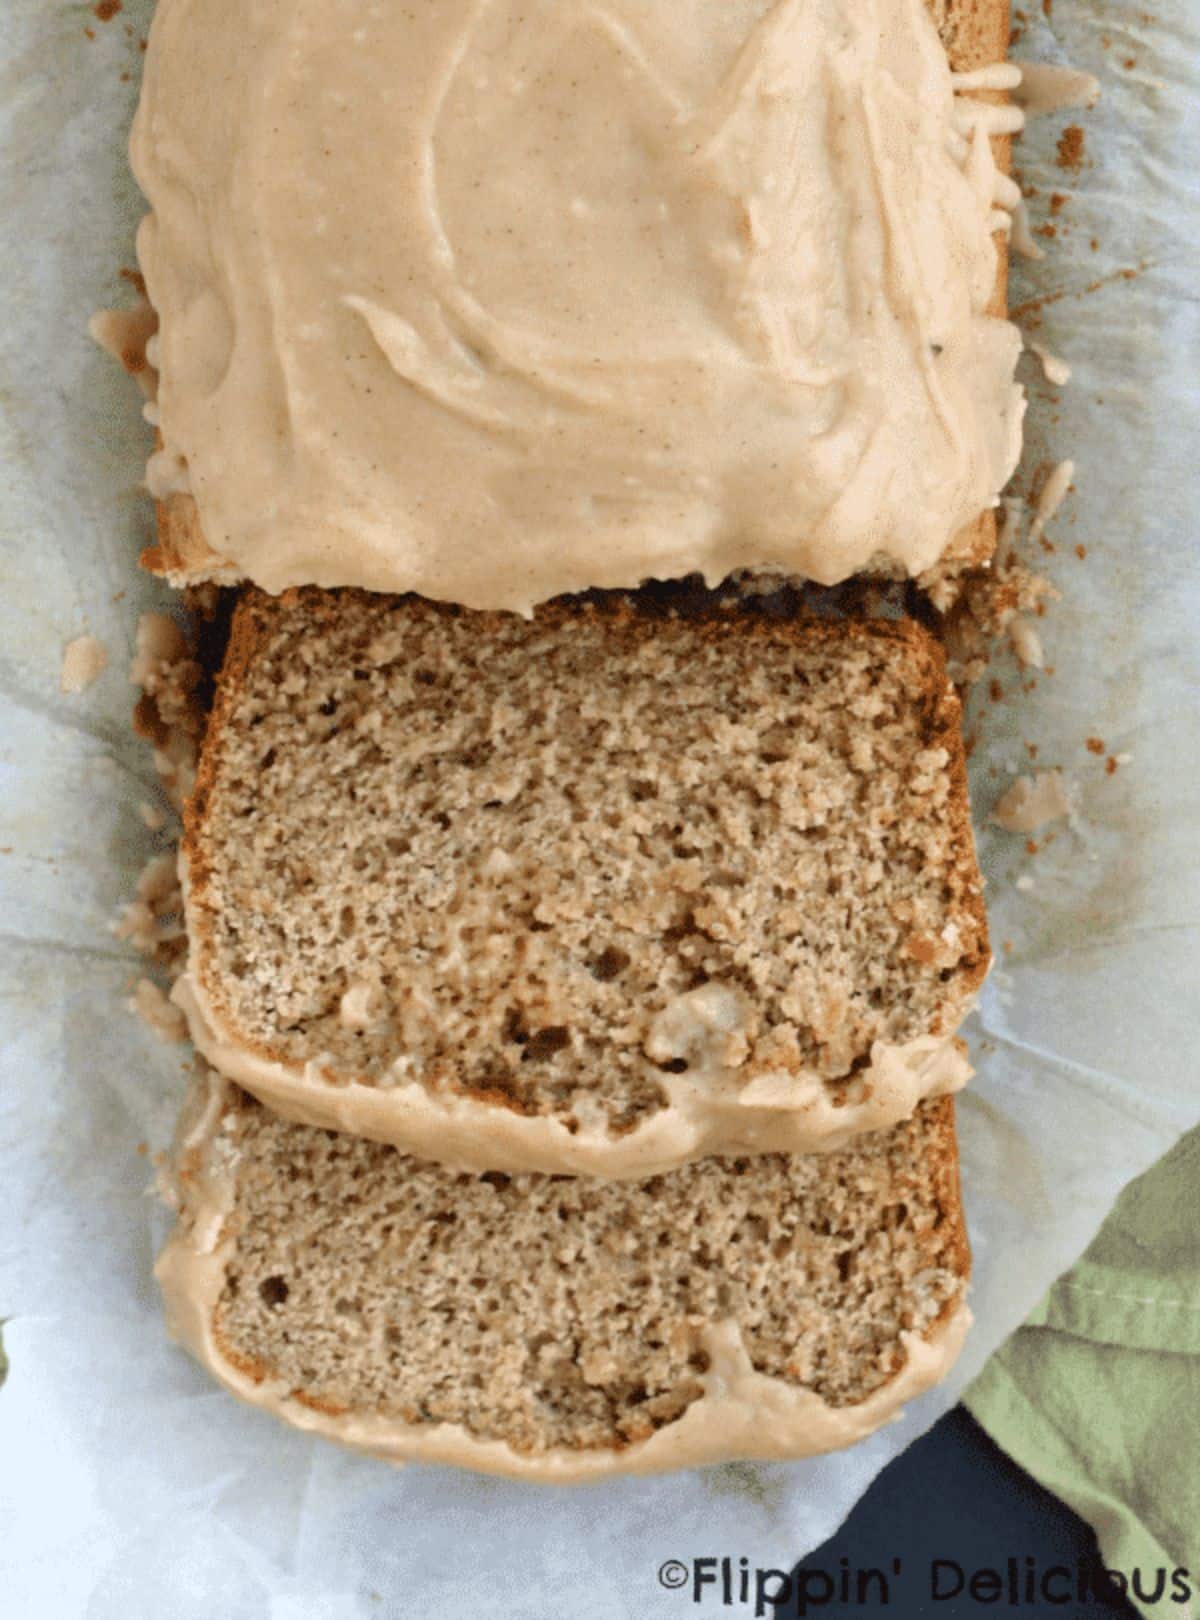 Slices of Gluten-Free Banana Bread With Browned Butter Frosting.